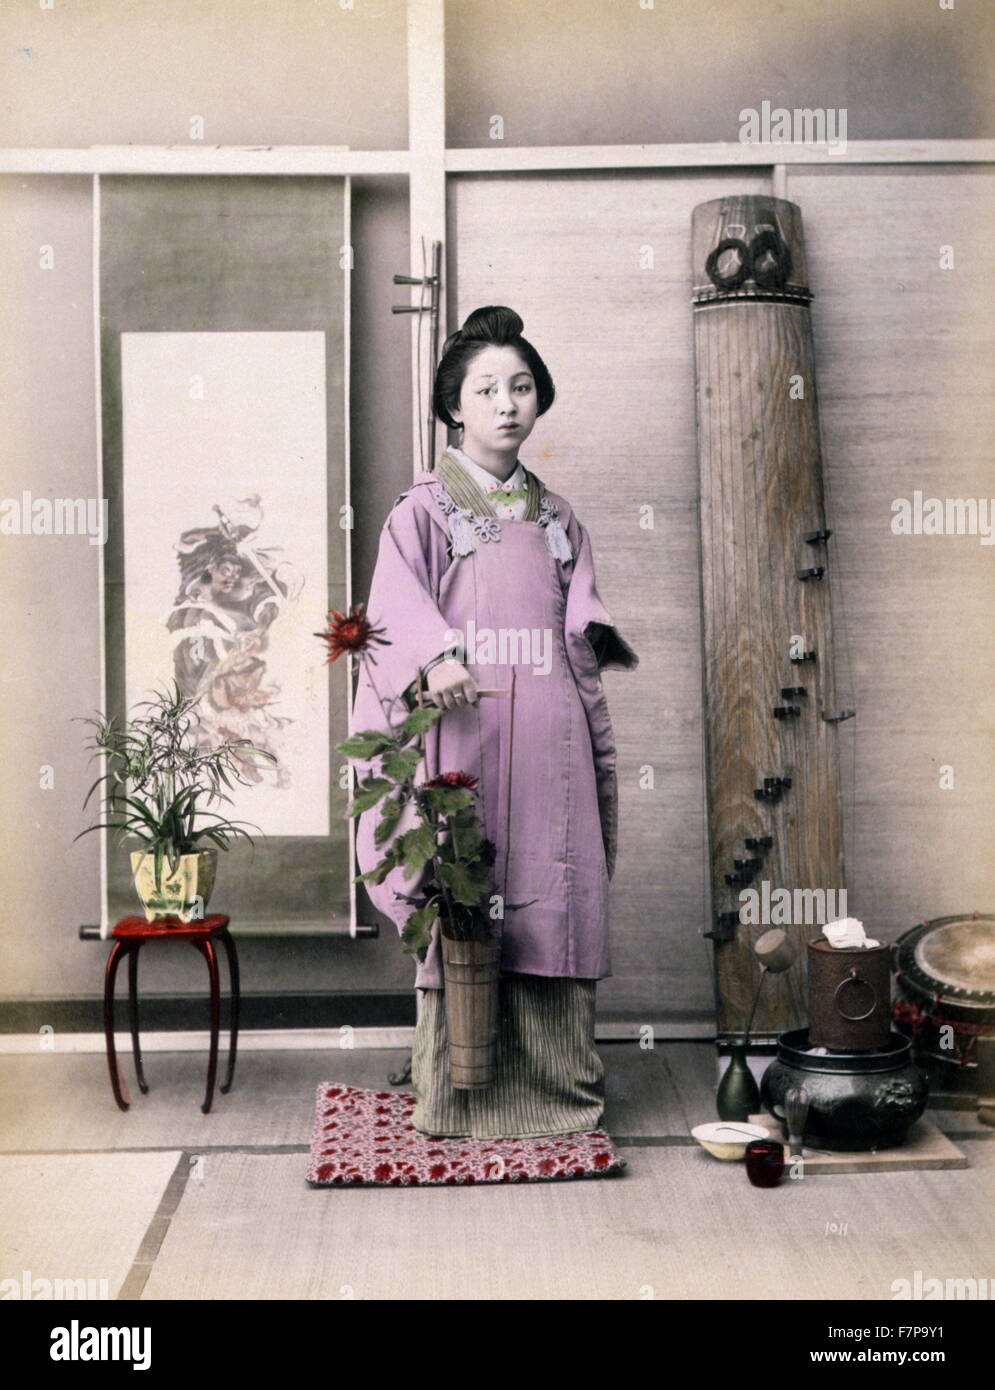 Photographic print : albumen, hand coloured with watercolour. Photograph shows a portrait of a young woman full-length, standing, facing front, holding a small long-handled bucket with flowers in it. There is a table with potted plant in front of a hanging scroll in the background on the left, and a Japanese zither leaning against the wall on the right. Stock Photo